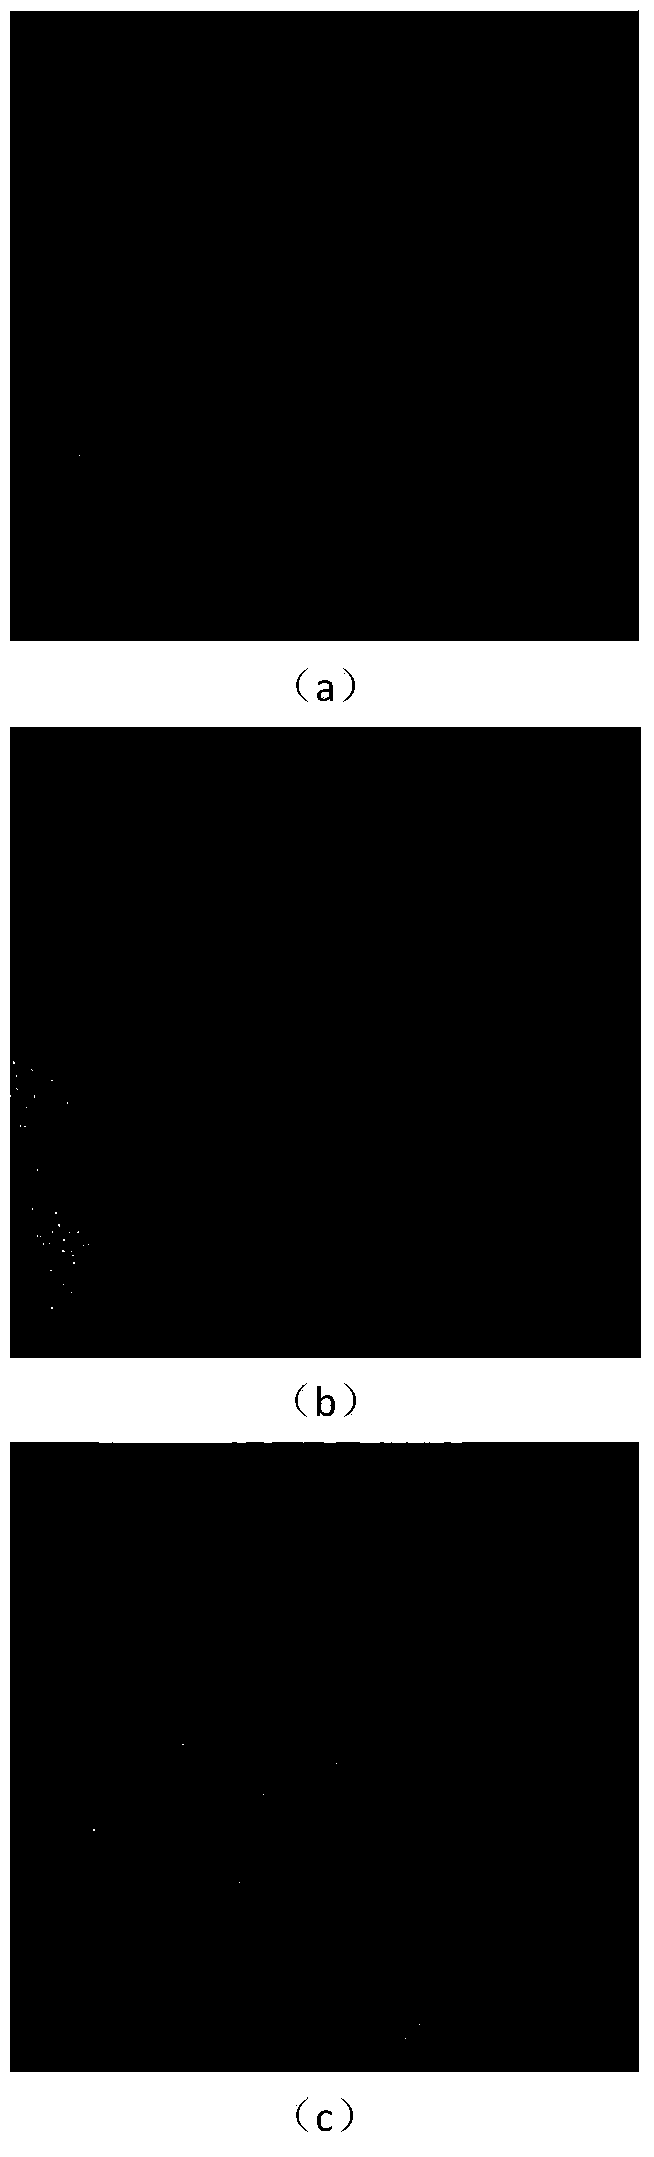 Method for quickly segmenting effective region of palmprint on line based on direction detection